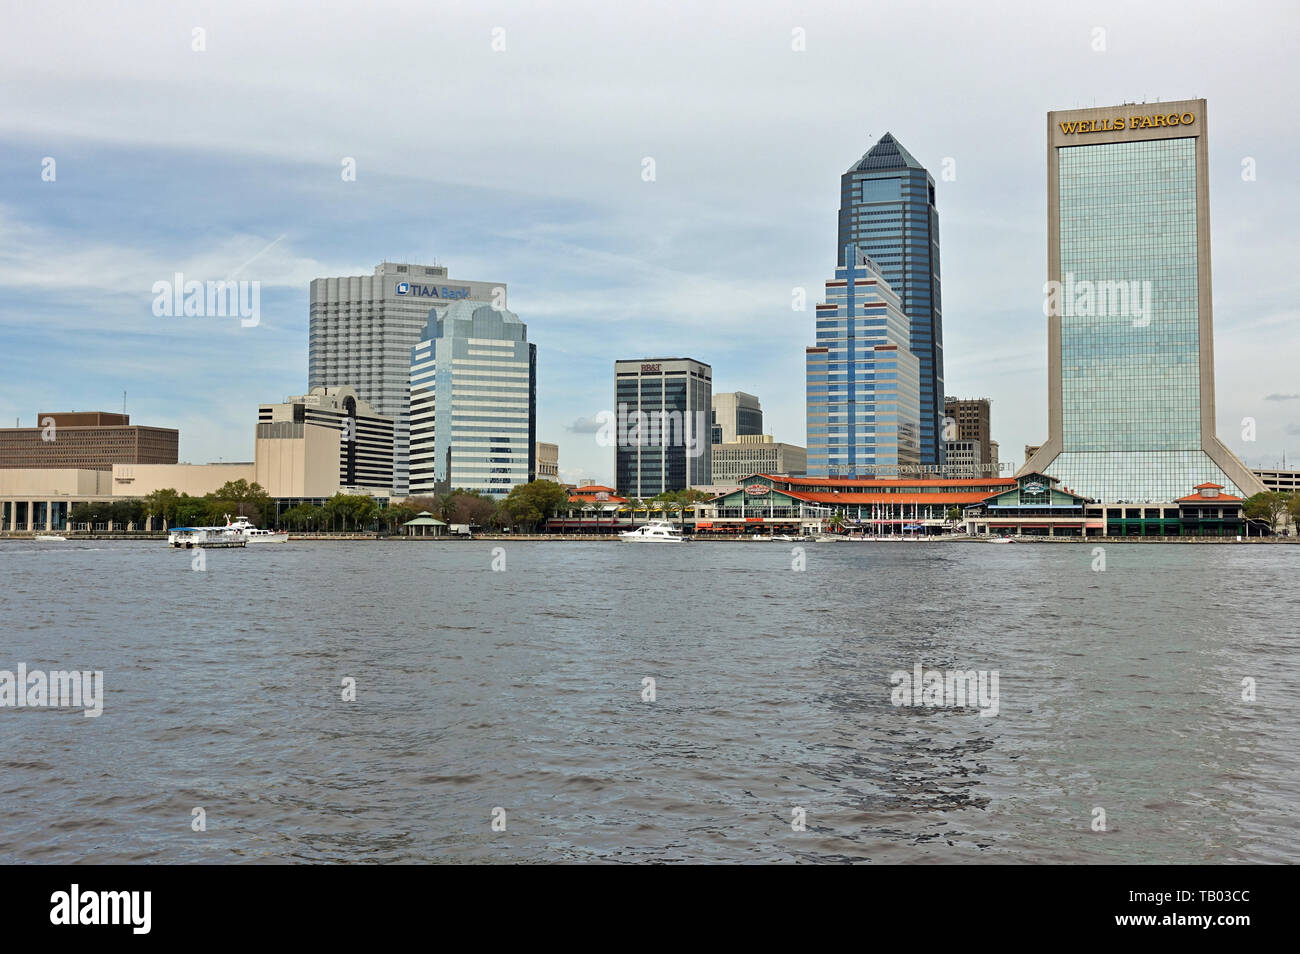 JACKSONVILLE, FL -9 MAR 2019- View of the Jacksonville skyline and the St Johns River in Jacksonville, Florida, United States. Stock Photo